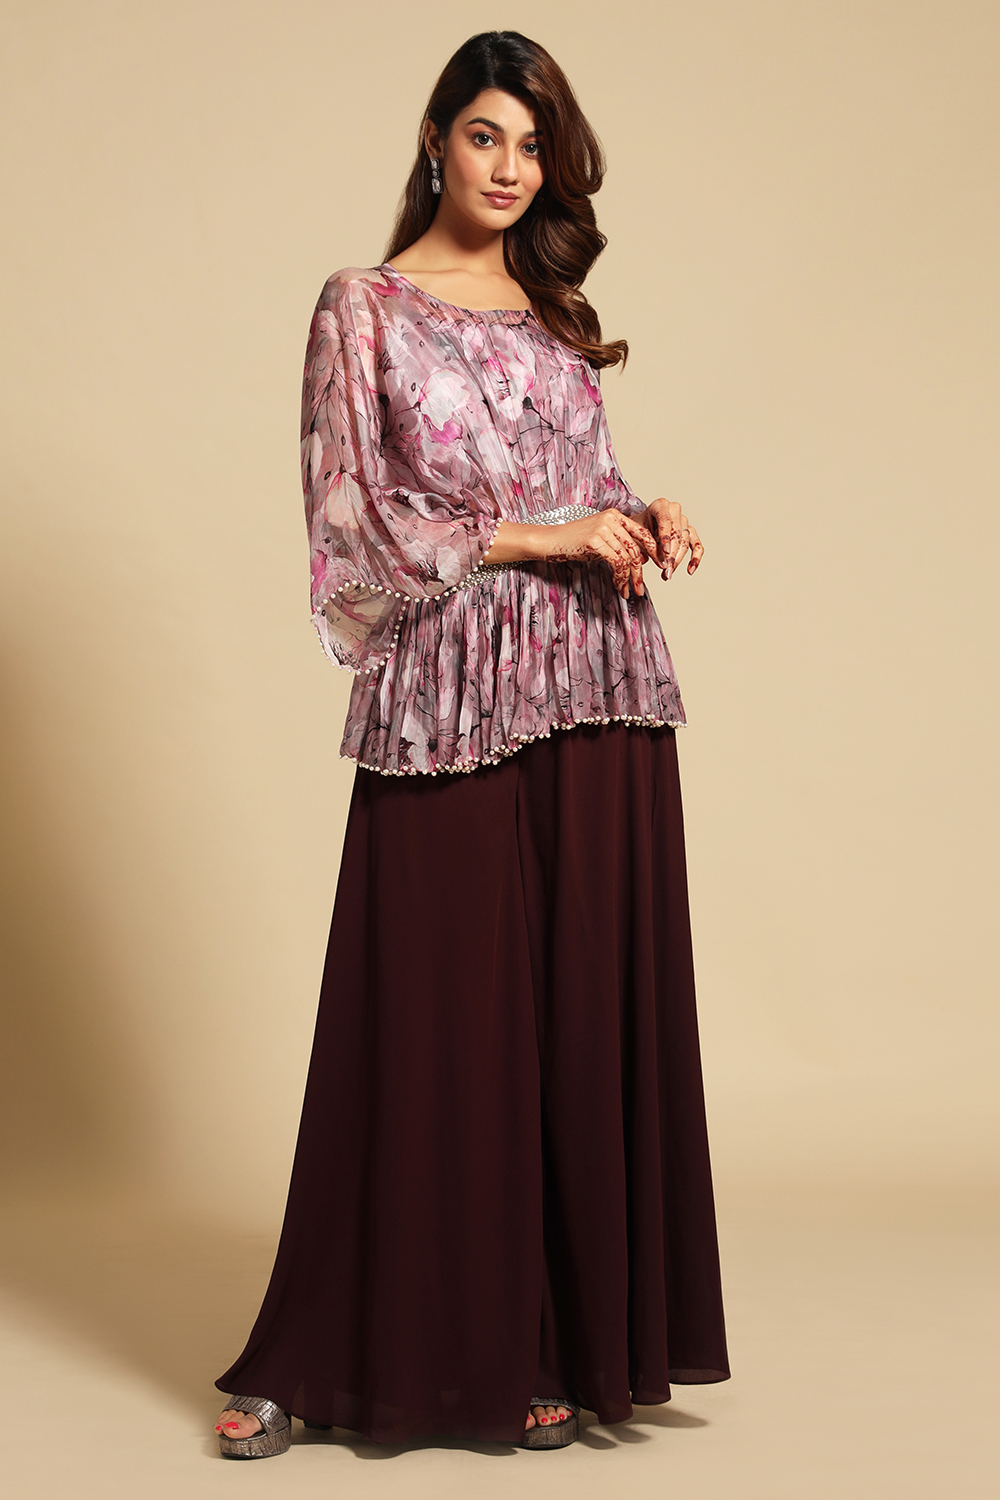 WINE BURGUNDY FLARED PALAZZO PANT SET PAIRED WITH A FLORAL PRINTED